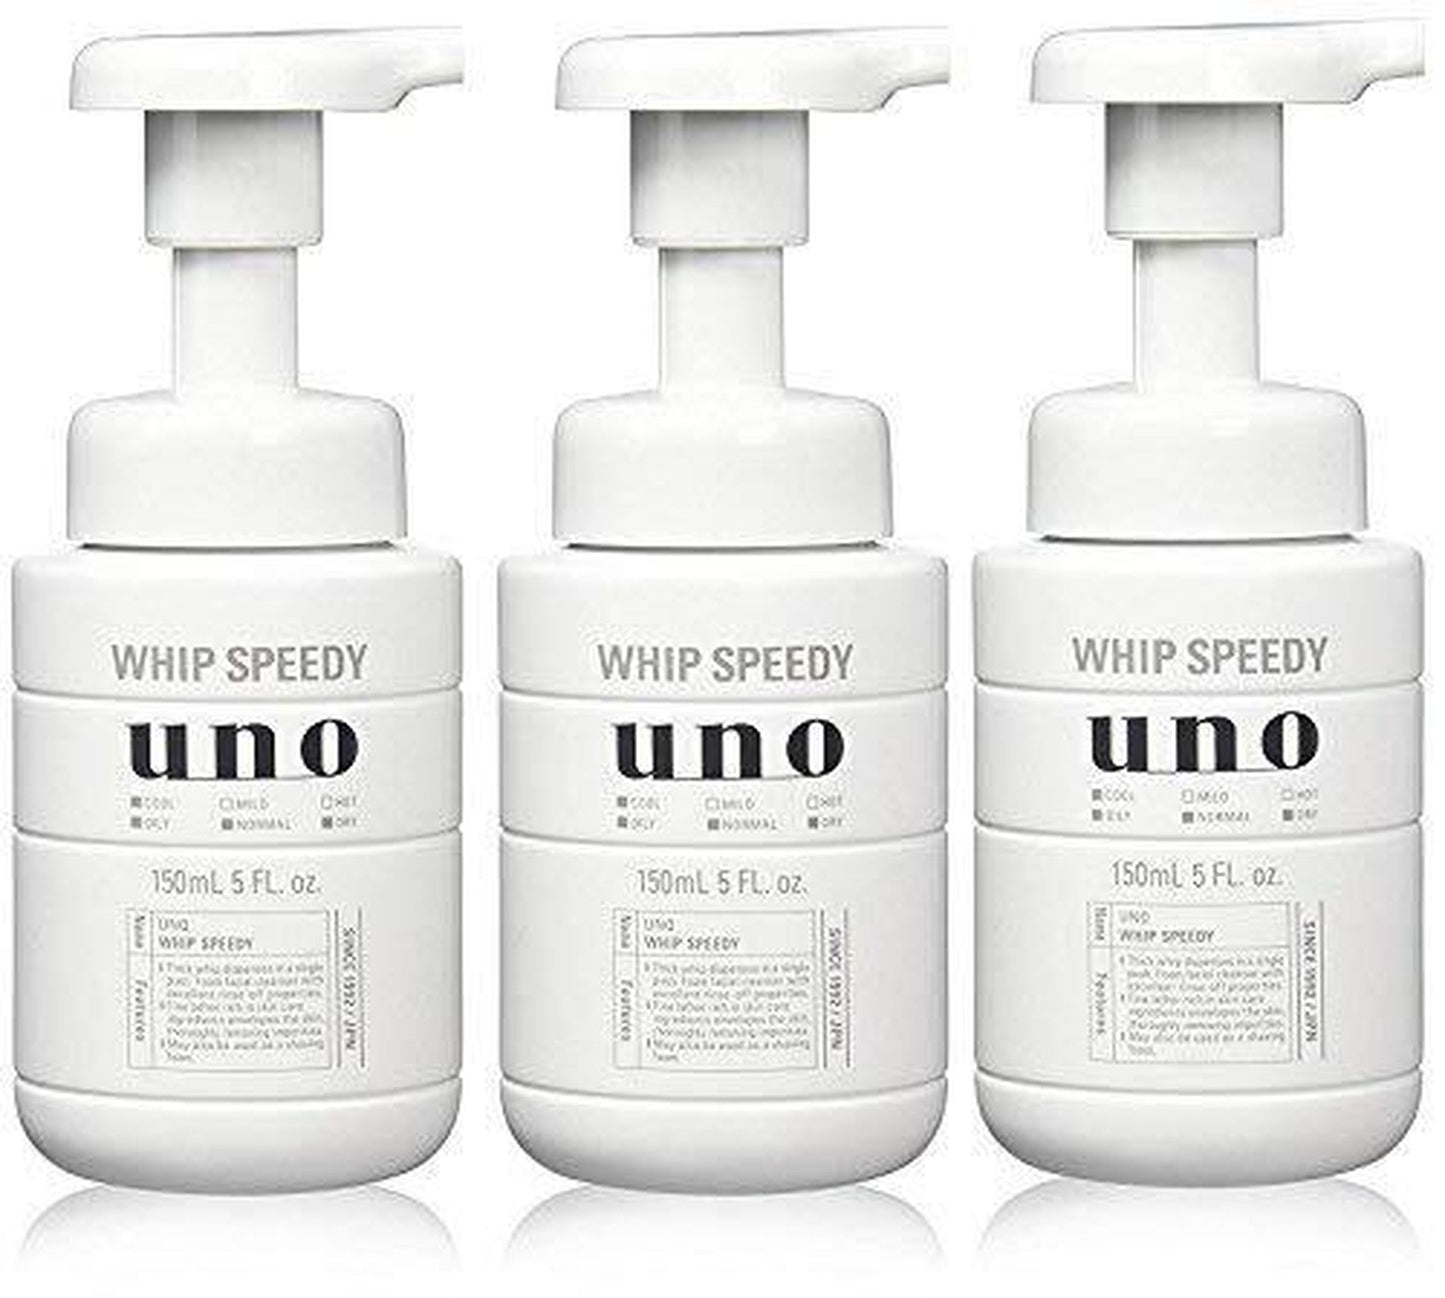 Set of 3 UNO Face Wash Foam Face Wash Whip Speedy Body 150ml Shiny and dry Cool and refreshing skin JAN:4901872449651